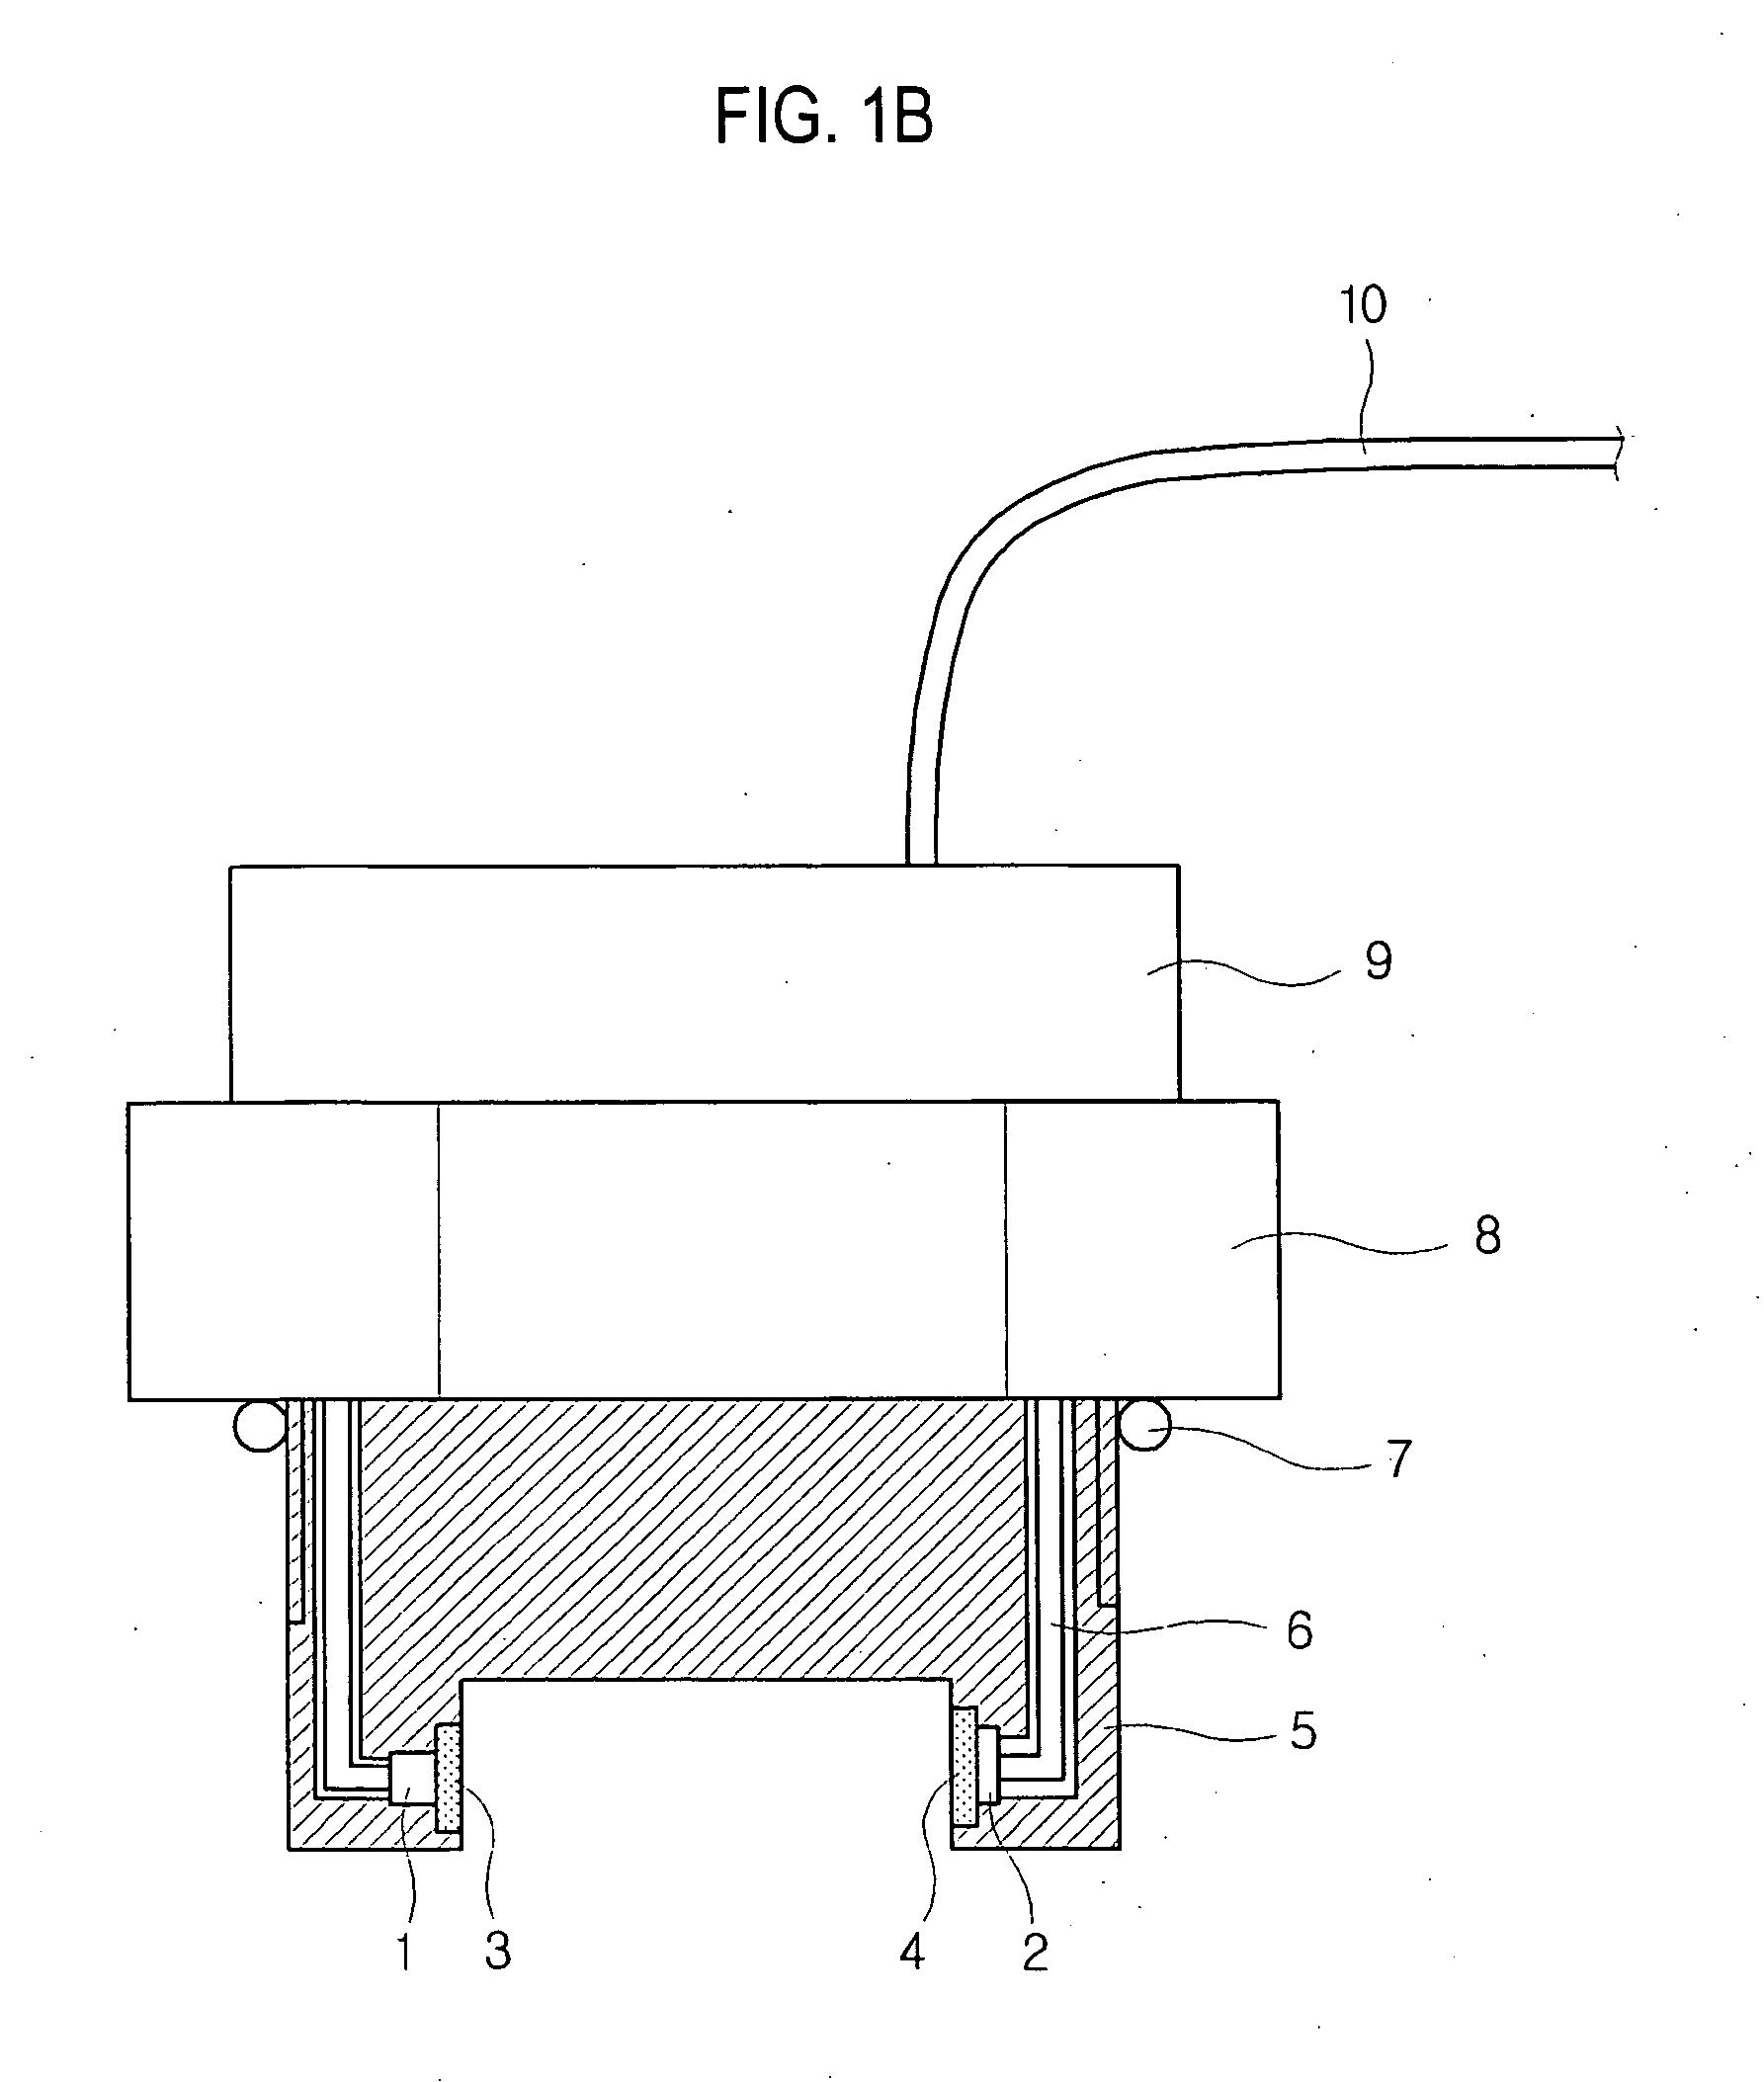 Method and apparatus for monitoring oil deterioration in real time